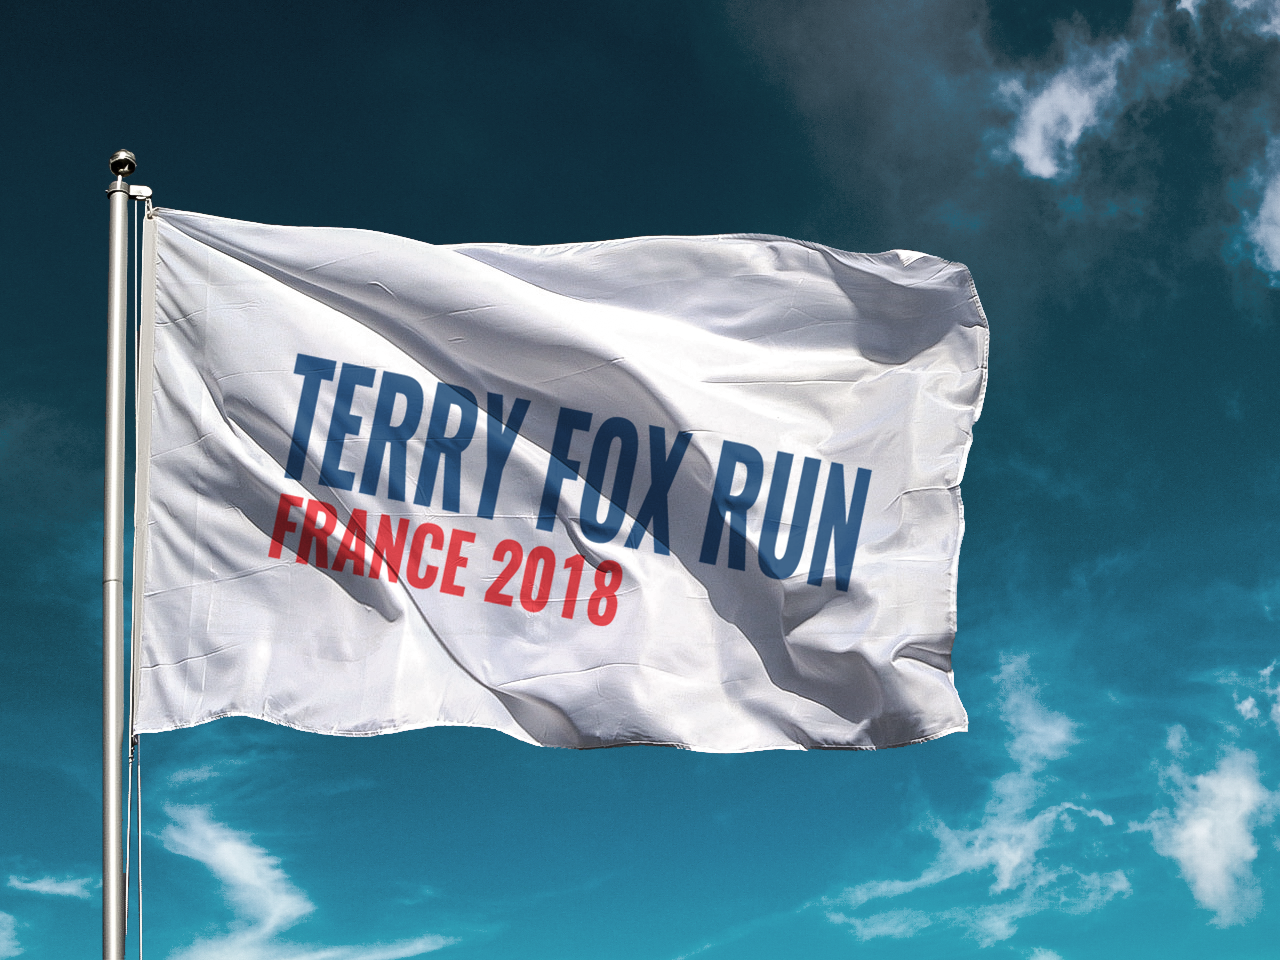 refonte logo terry fox run graphical activity graphiste moselle